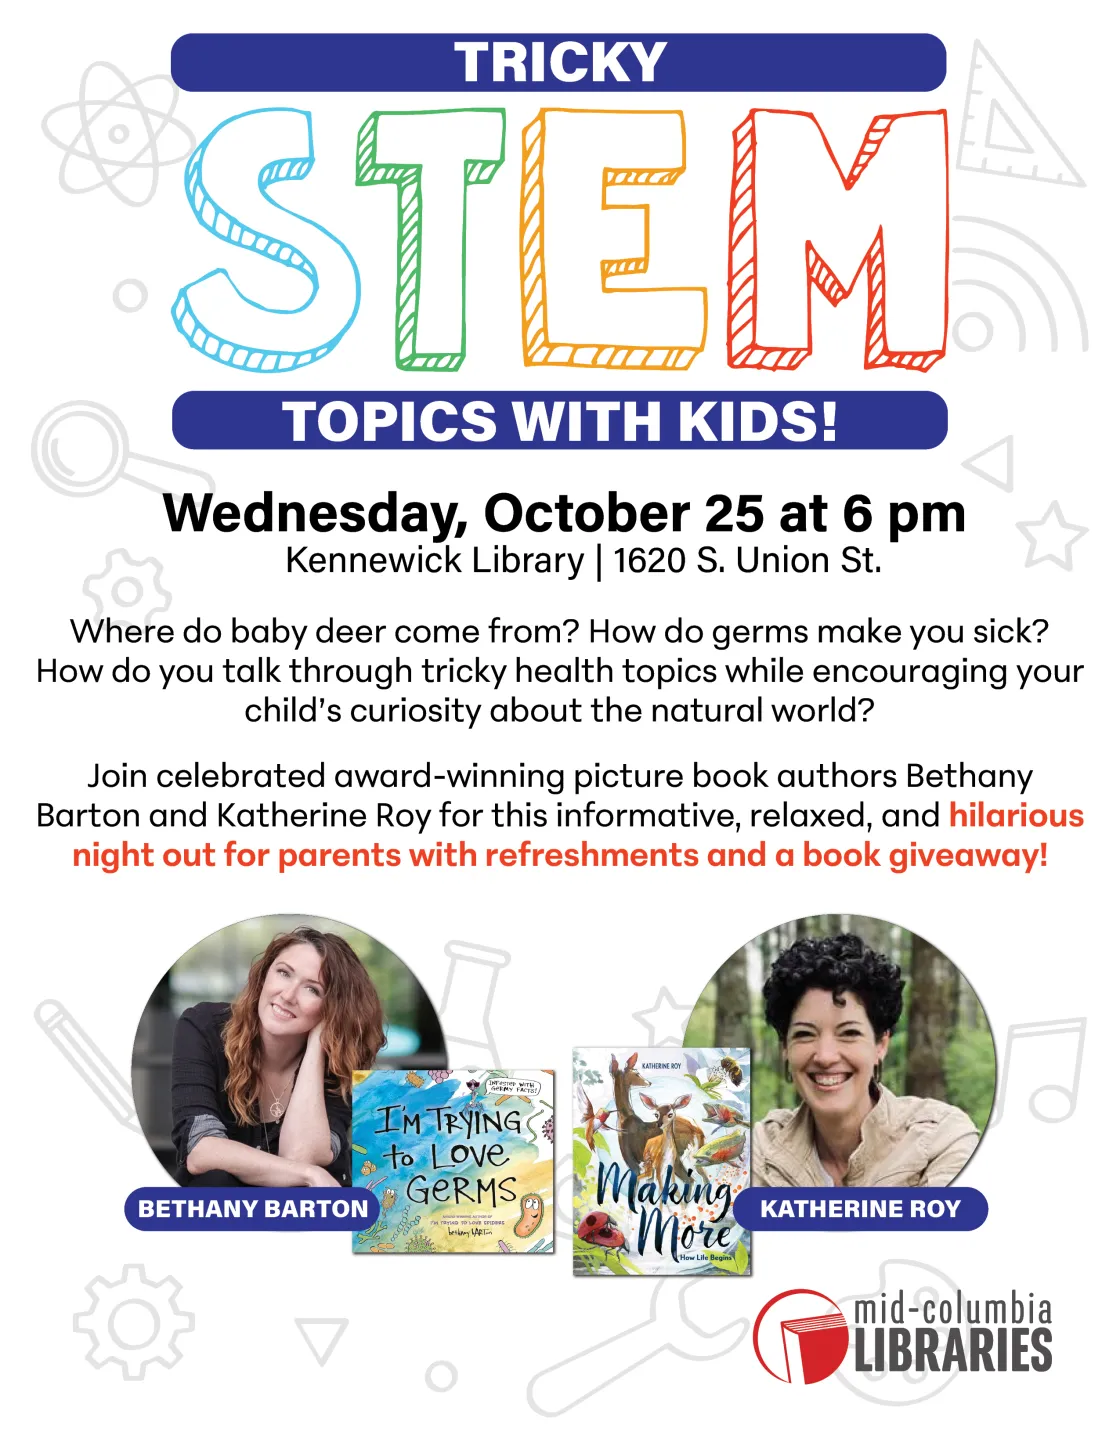 Poster Promoting Author Visit about how to discuss tricky STEM topics for kids